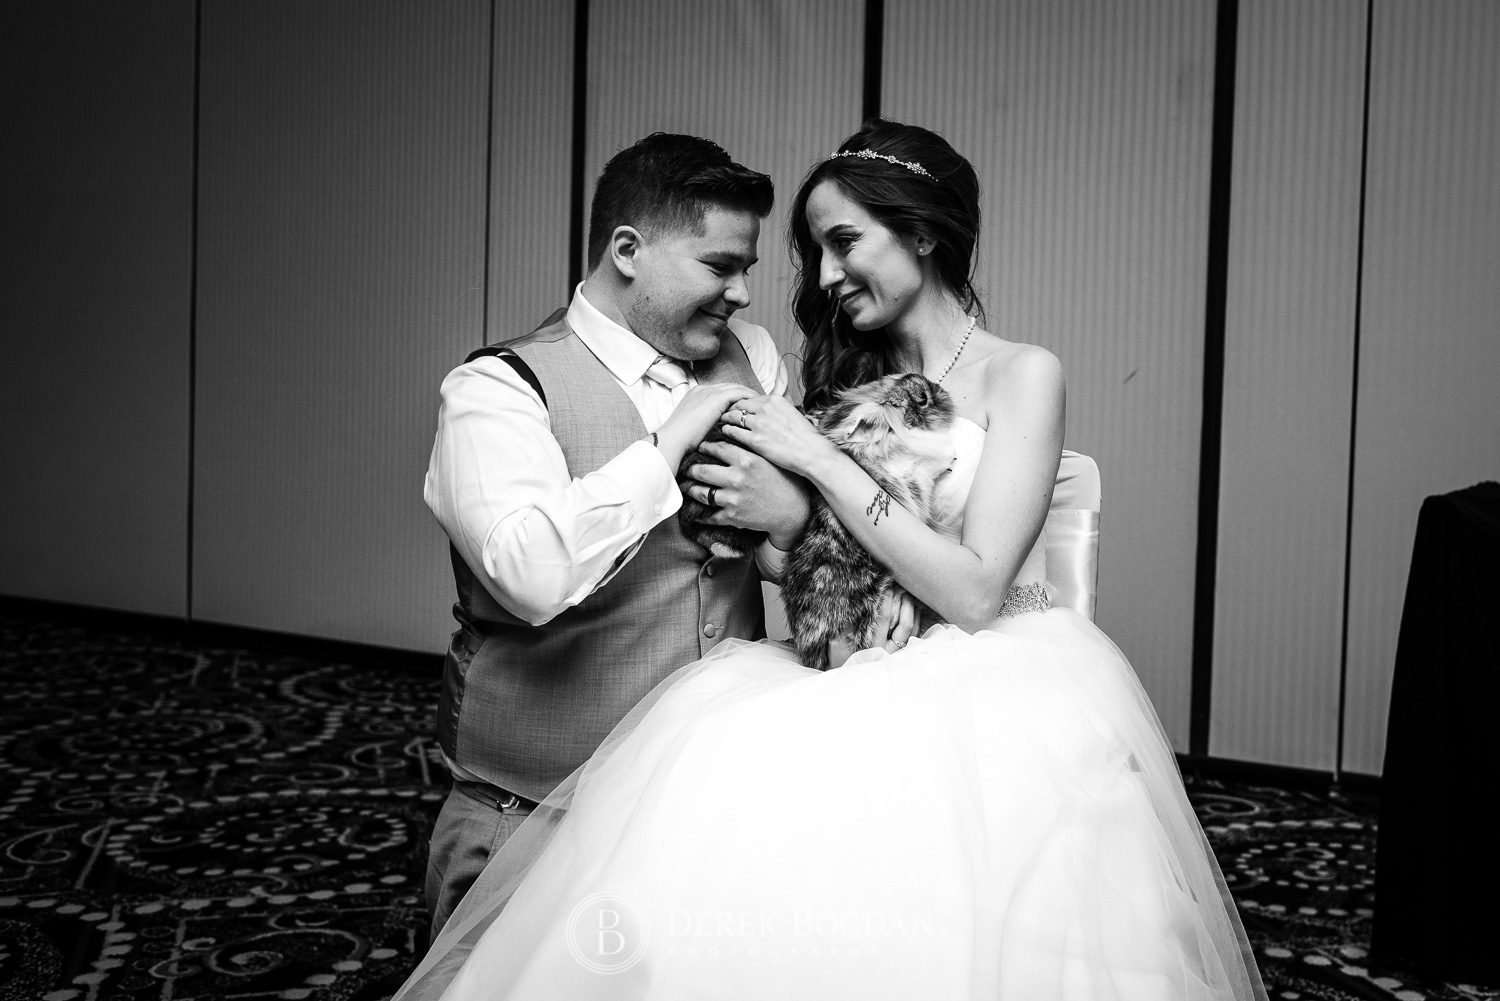 Bride and groom share moment with their pet rabbits Victoria Inn Winnipeg